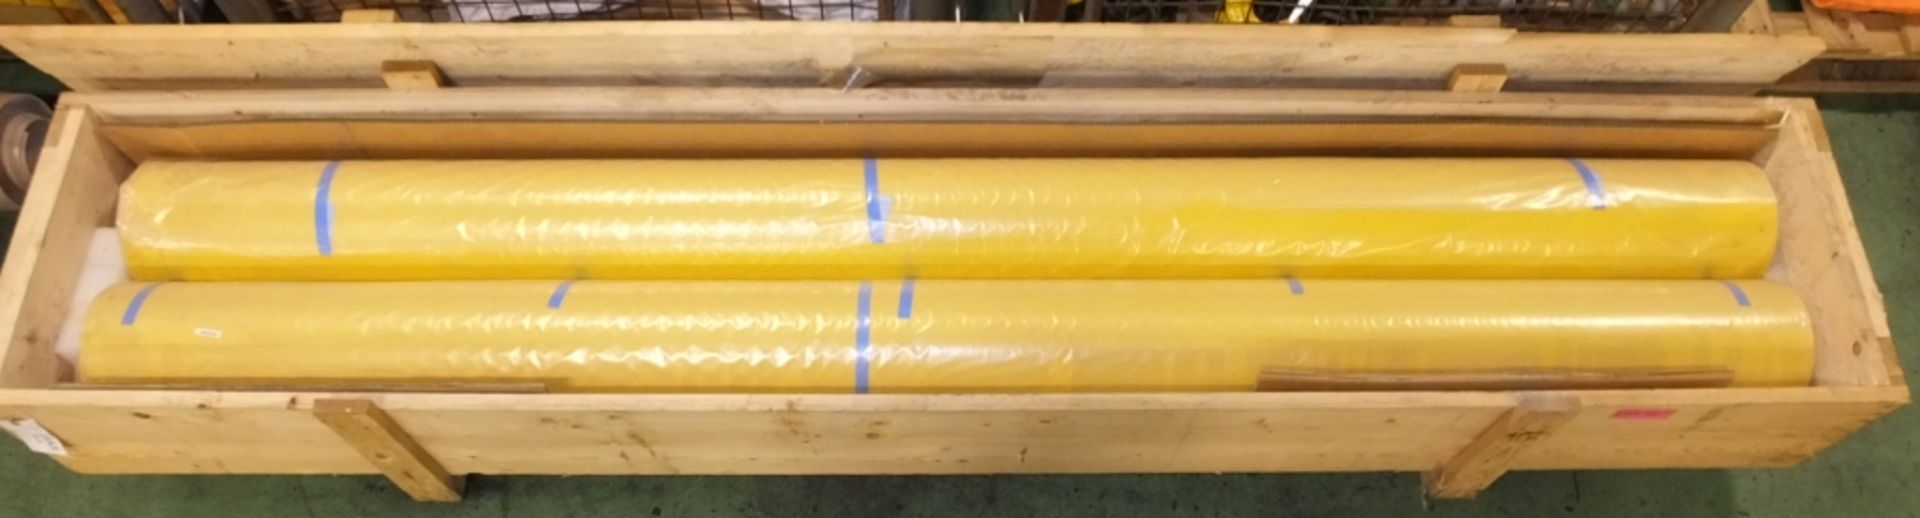 Plastic Sheet Yellow 251 cm wide - unknown length